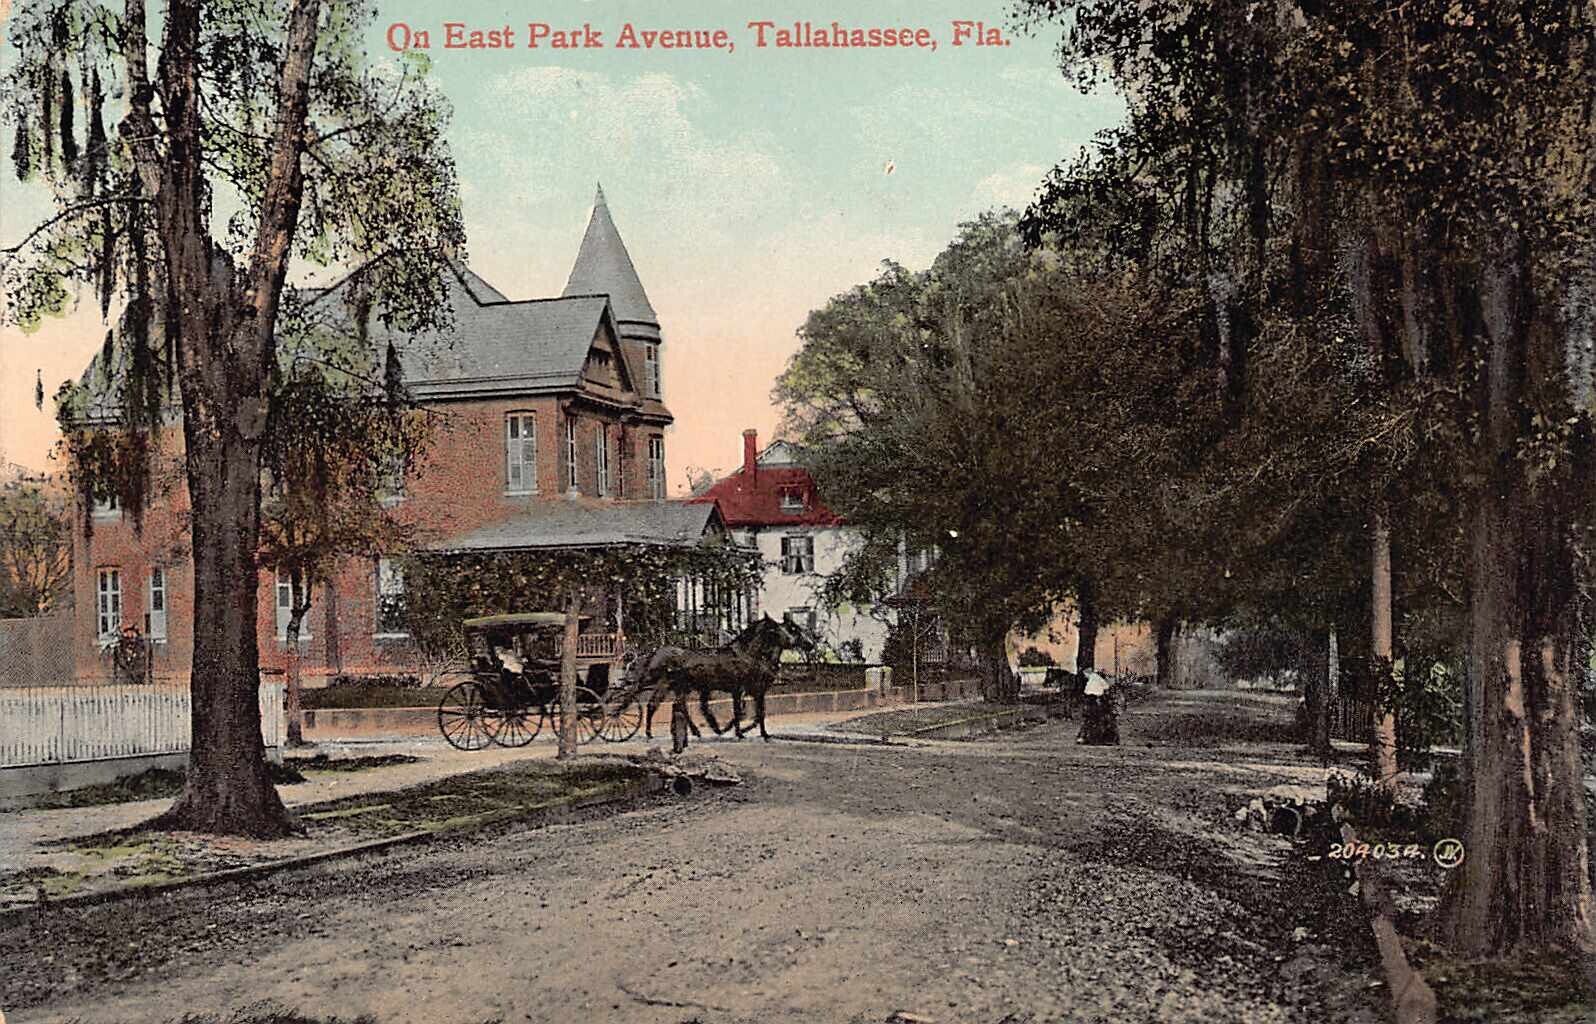 FL - 1900’s RARE East Park Avenue at Tallahassee, FLA - LEON COUNTY